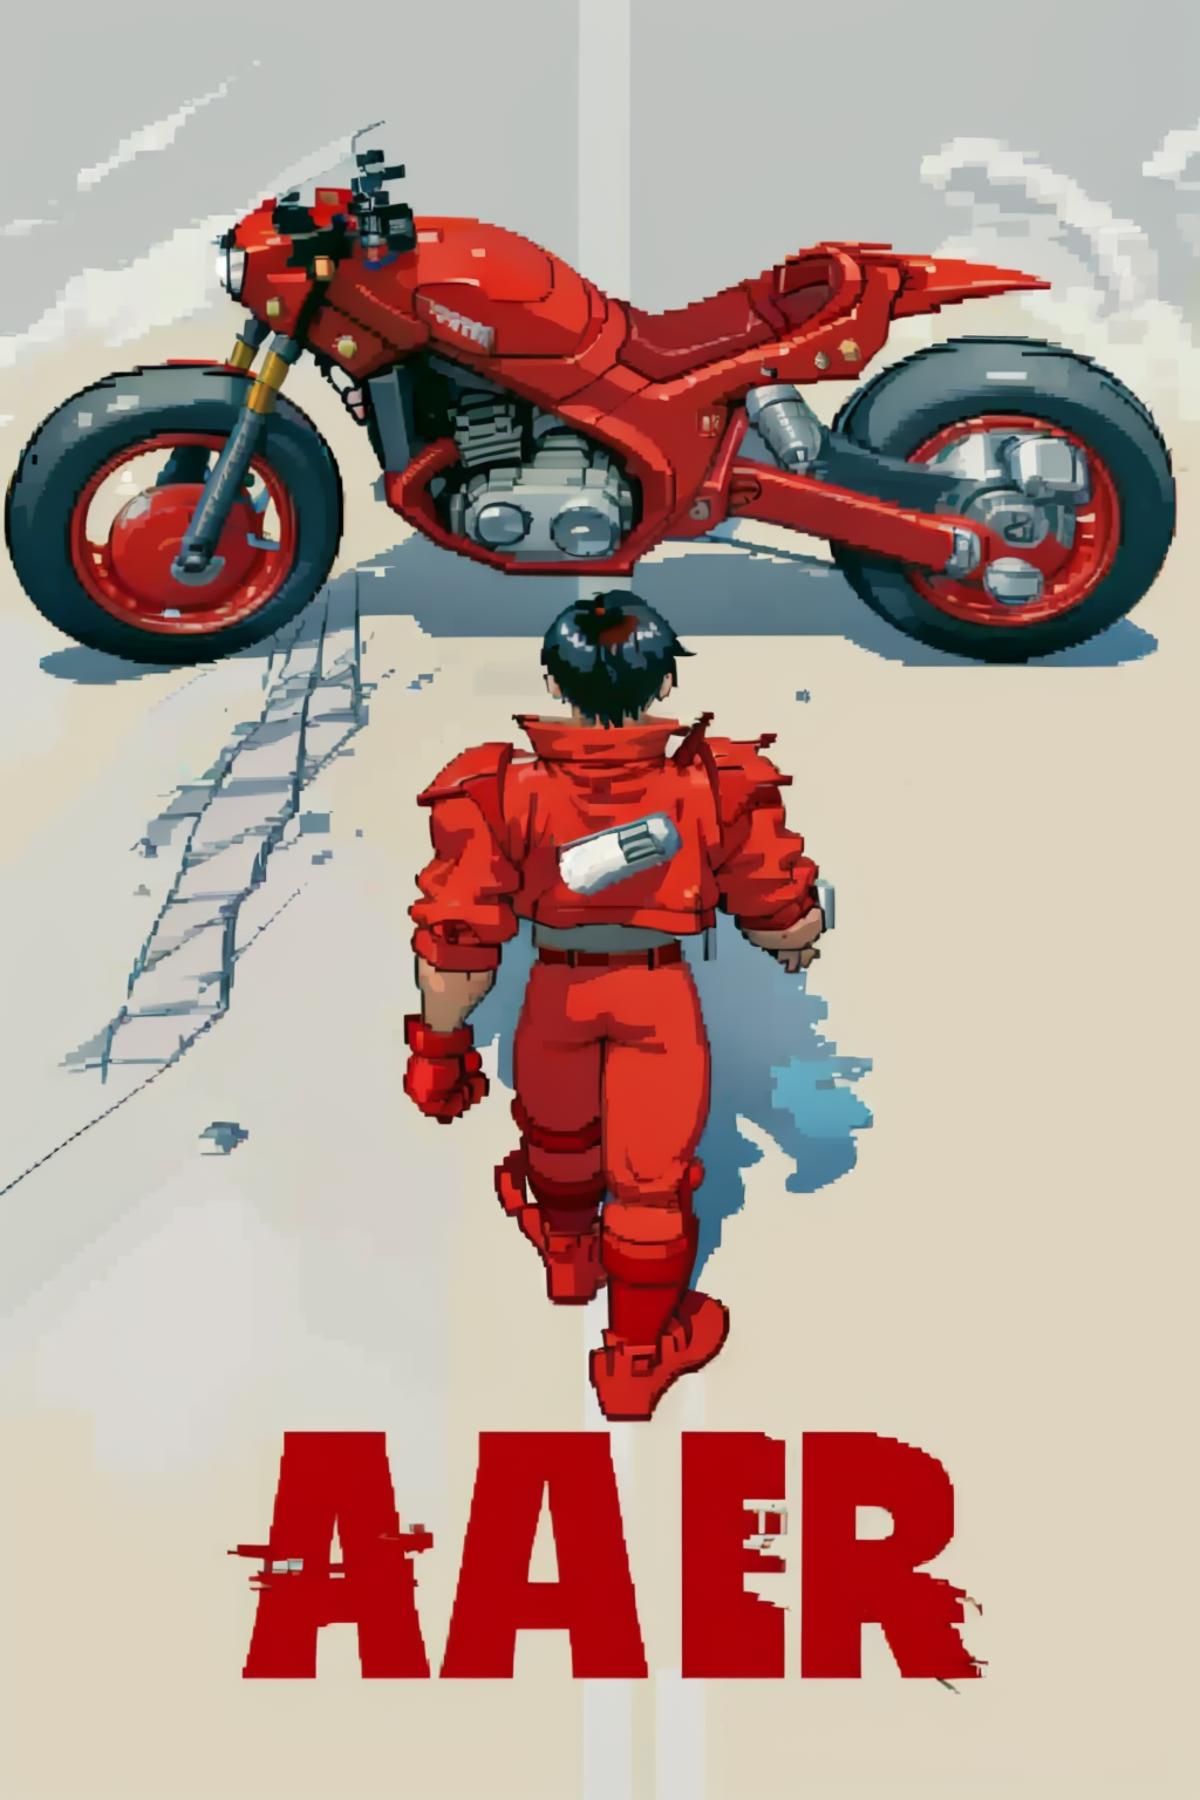 Akira Poster | Concept image by FP_plus